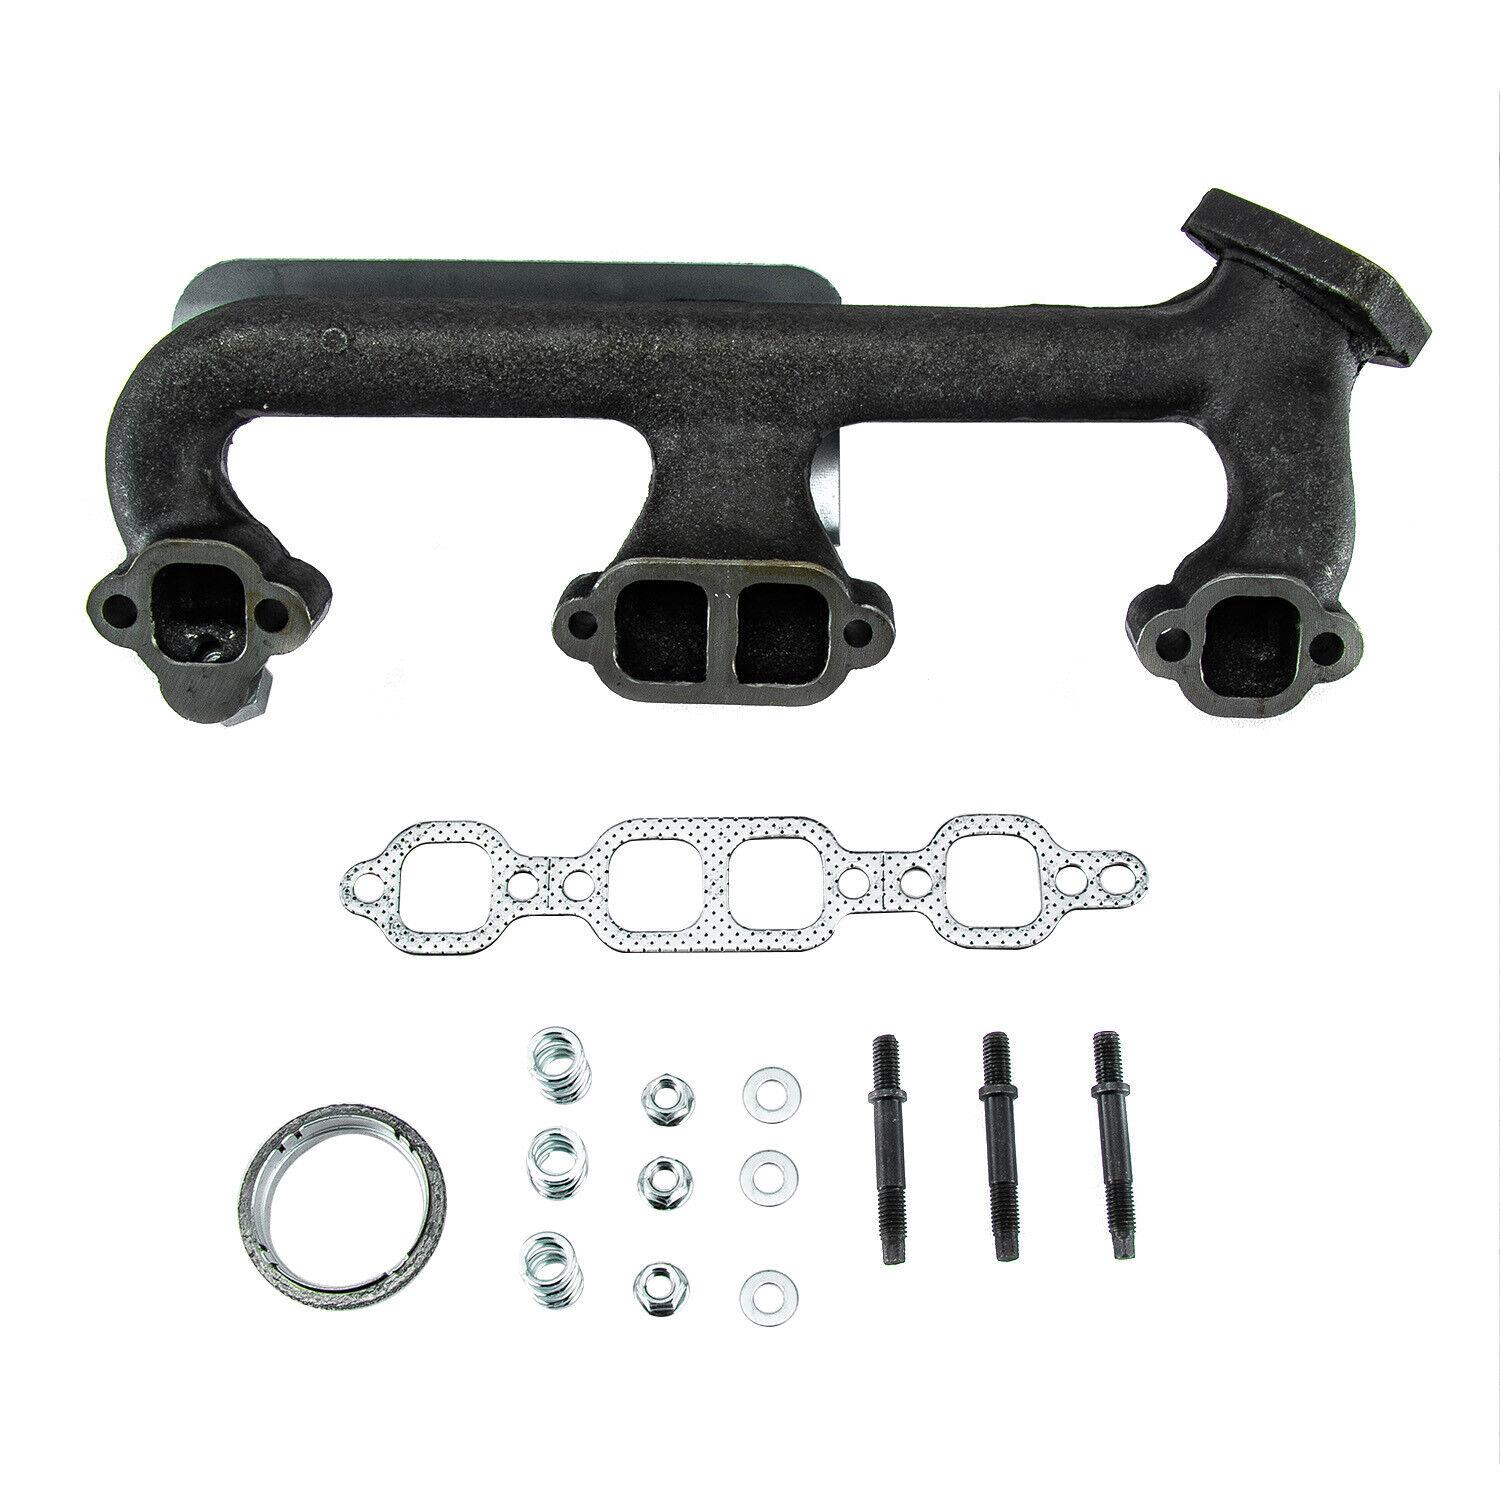 Exhaust Manifold For 1988-95 Chevy GMC C/K 1500 2500 Pickup 350 305 5.0L New